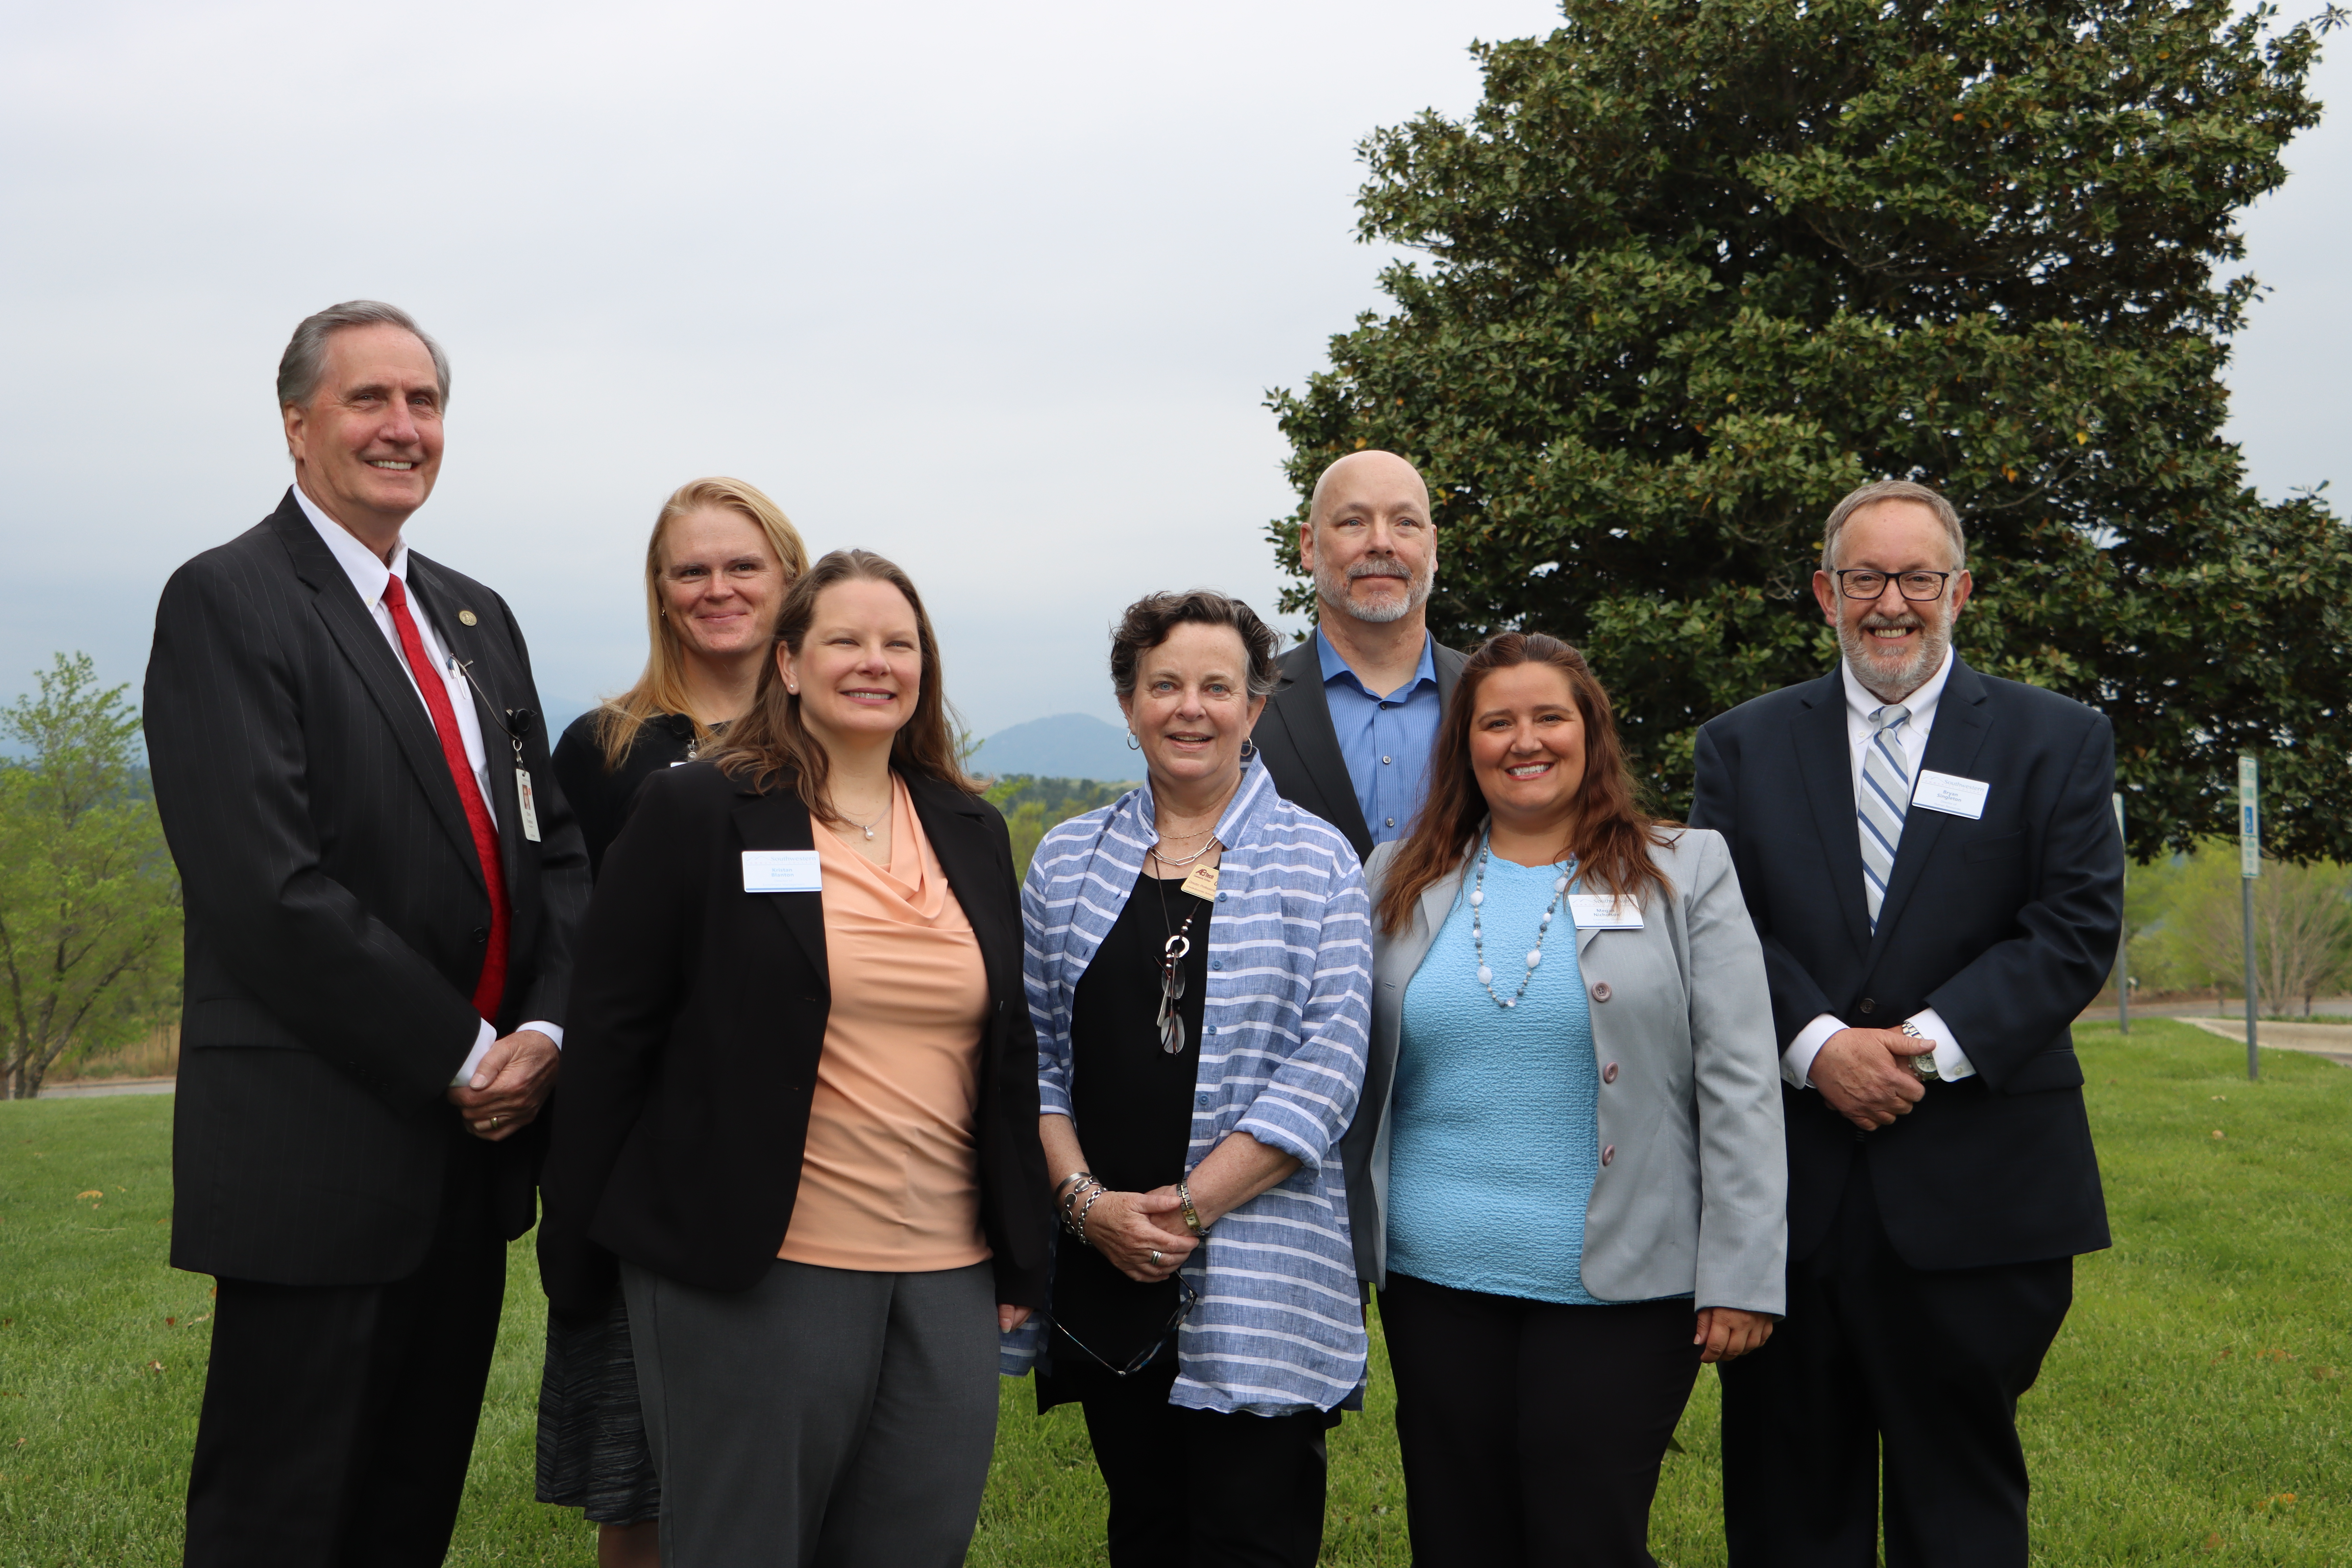 SCC's employees who participated in the WCCLA